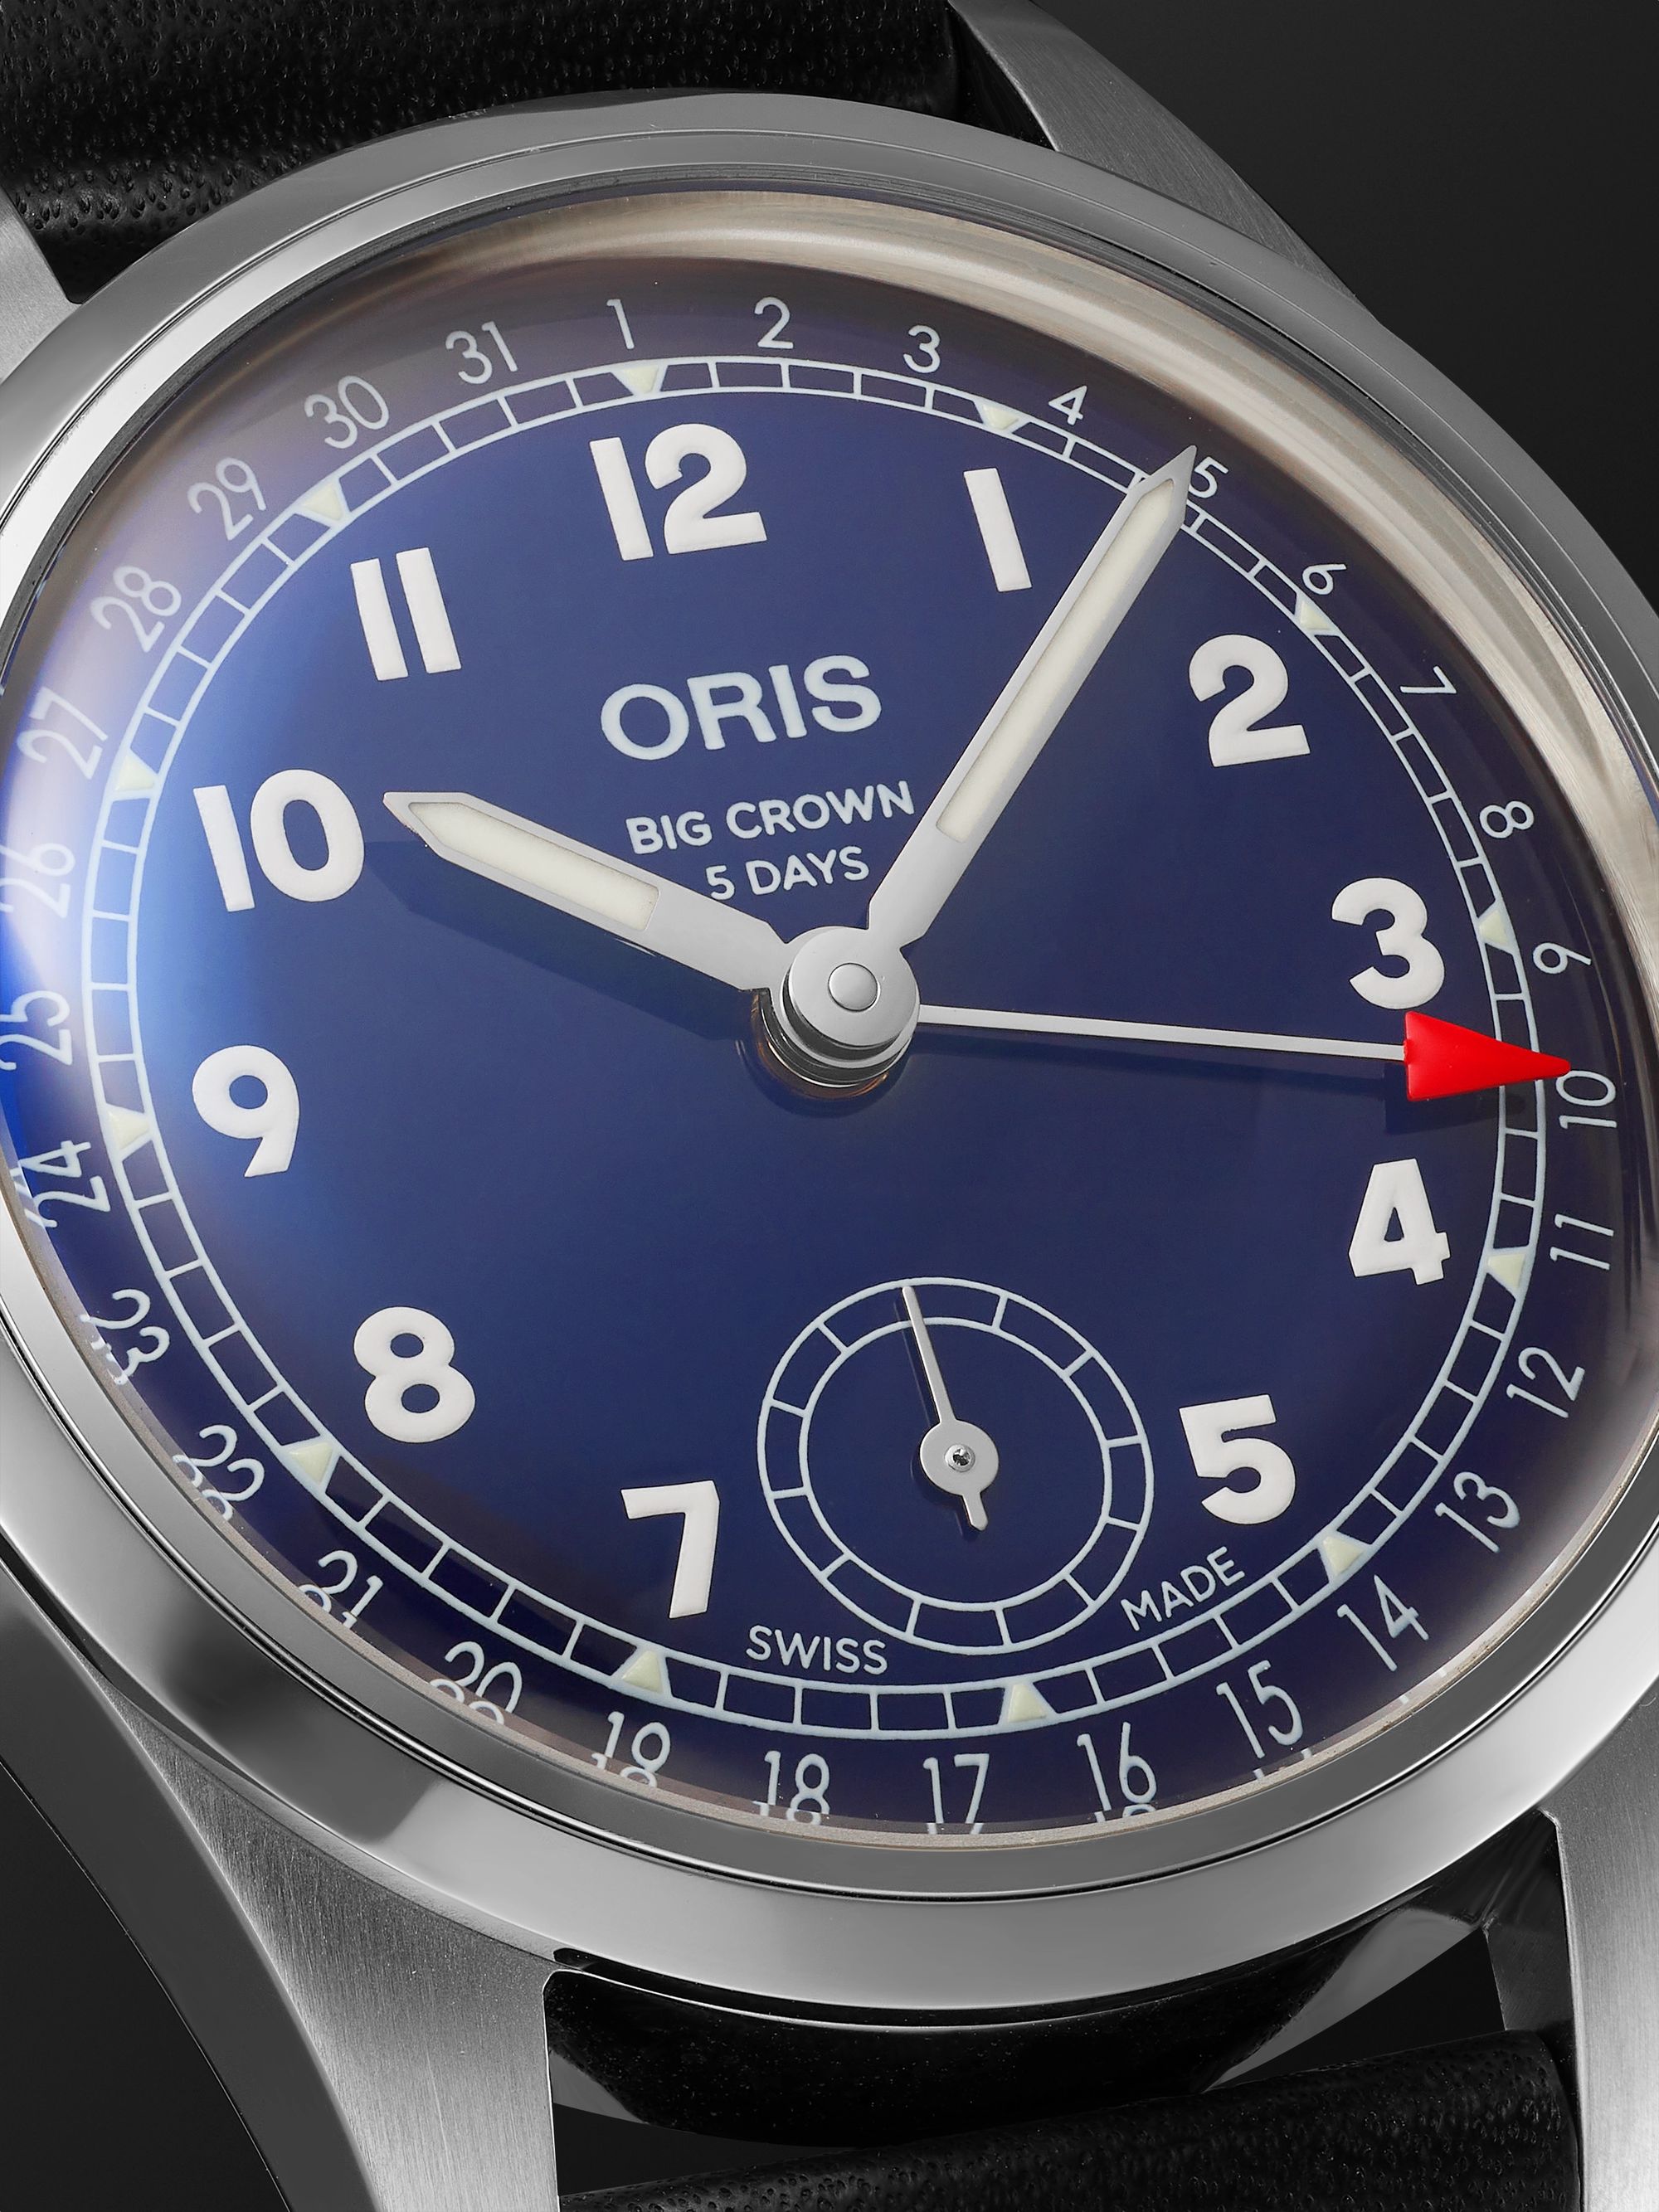 ORIS Big Crown Pointer Date Automatic 38mm Stainless Steel and Leather Watch, Ref. No. 01 403 7776 4065-07 5 19 11